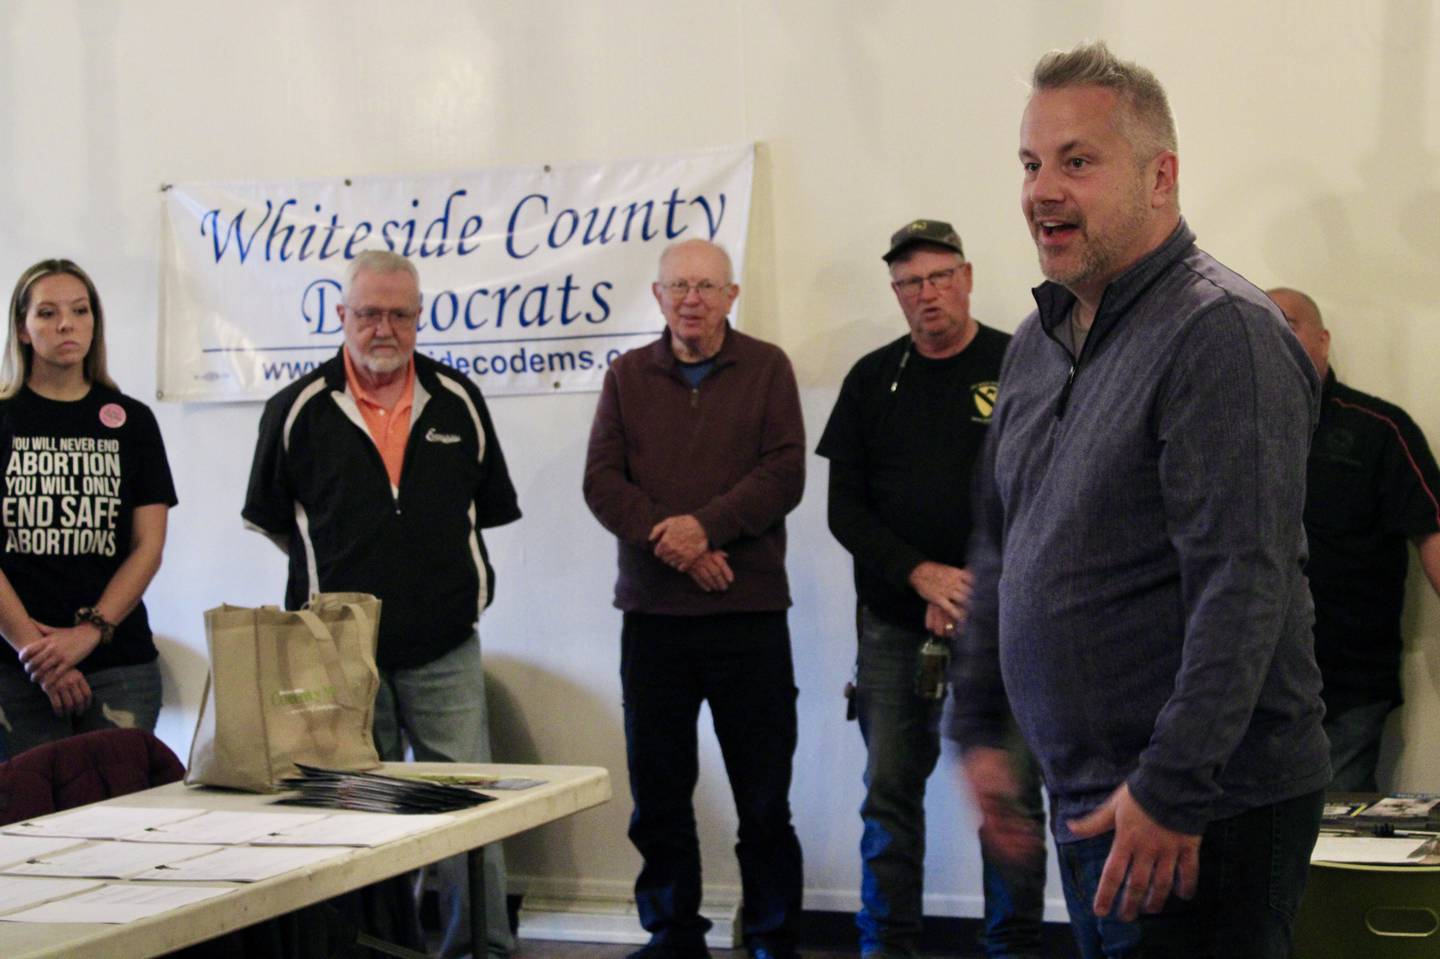 Eric Sorensen, Democratic candidate for the 17th District U.S. House seat, addresses supporters before they begin door-to-door canvassing on Saturday at the Whiteside County Democratic headquarters in Rock Falls.